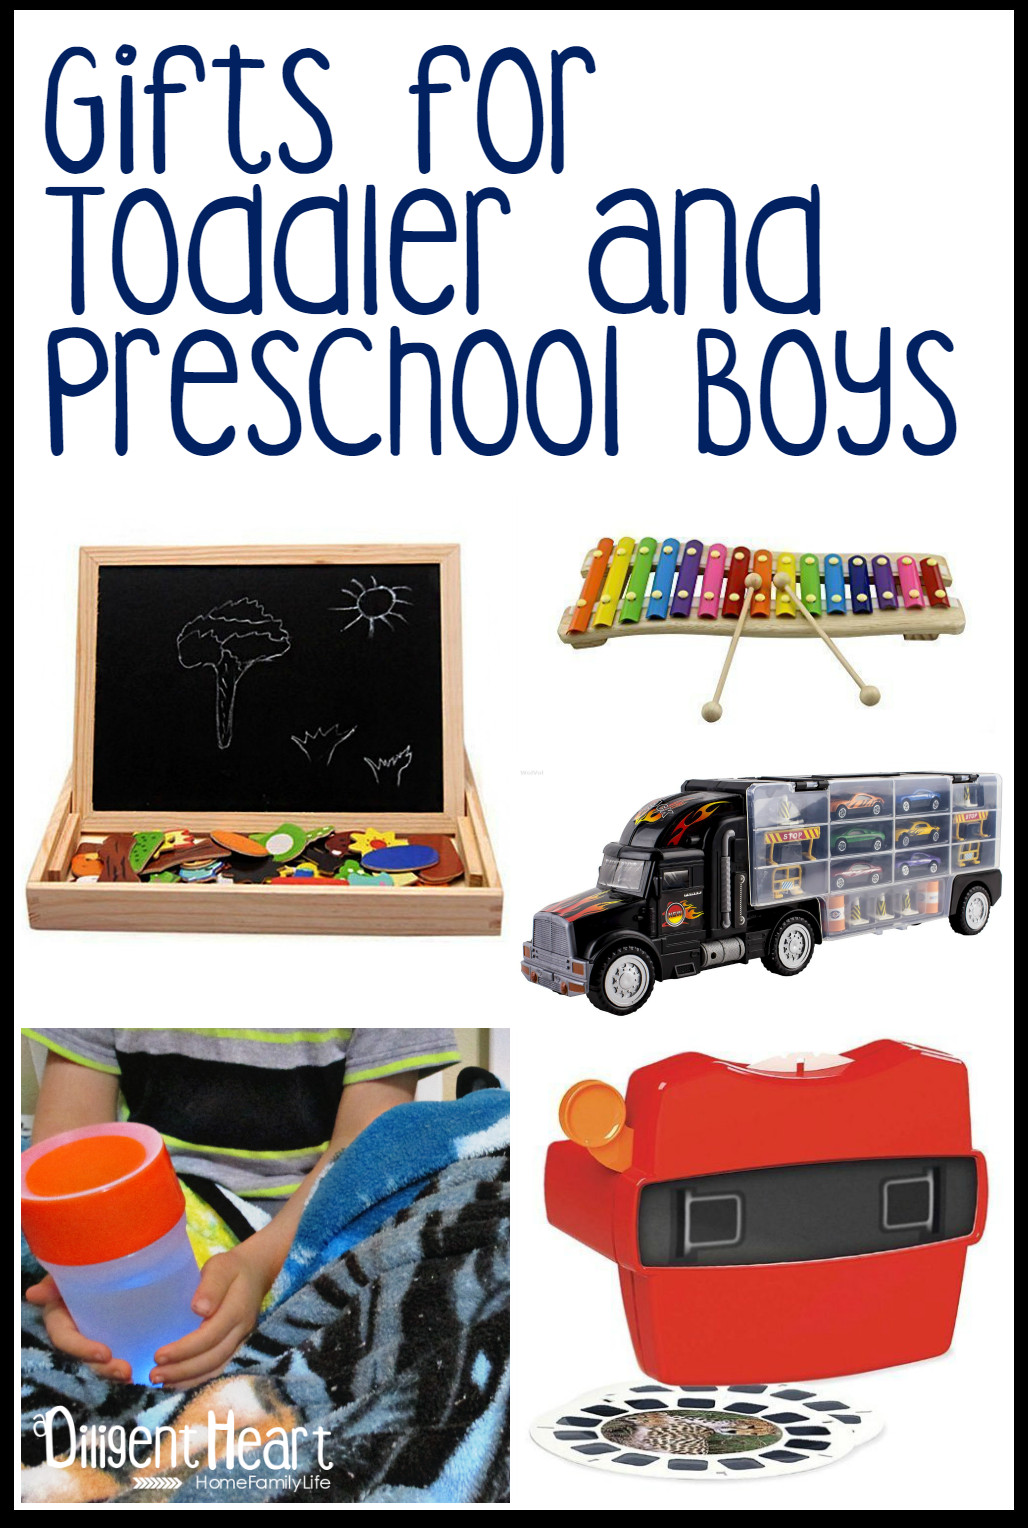 Gift Ideas For Little Boys
 Gifts For Toddler and Preschool Boys